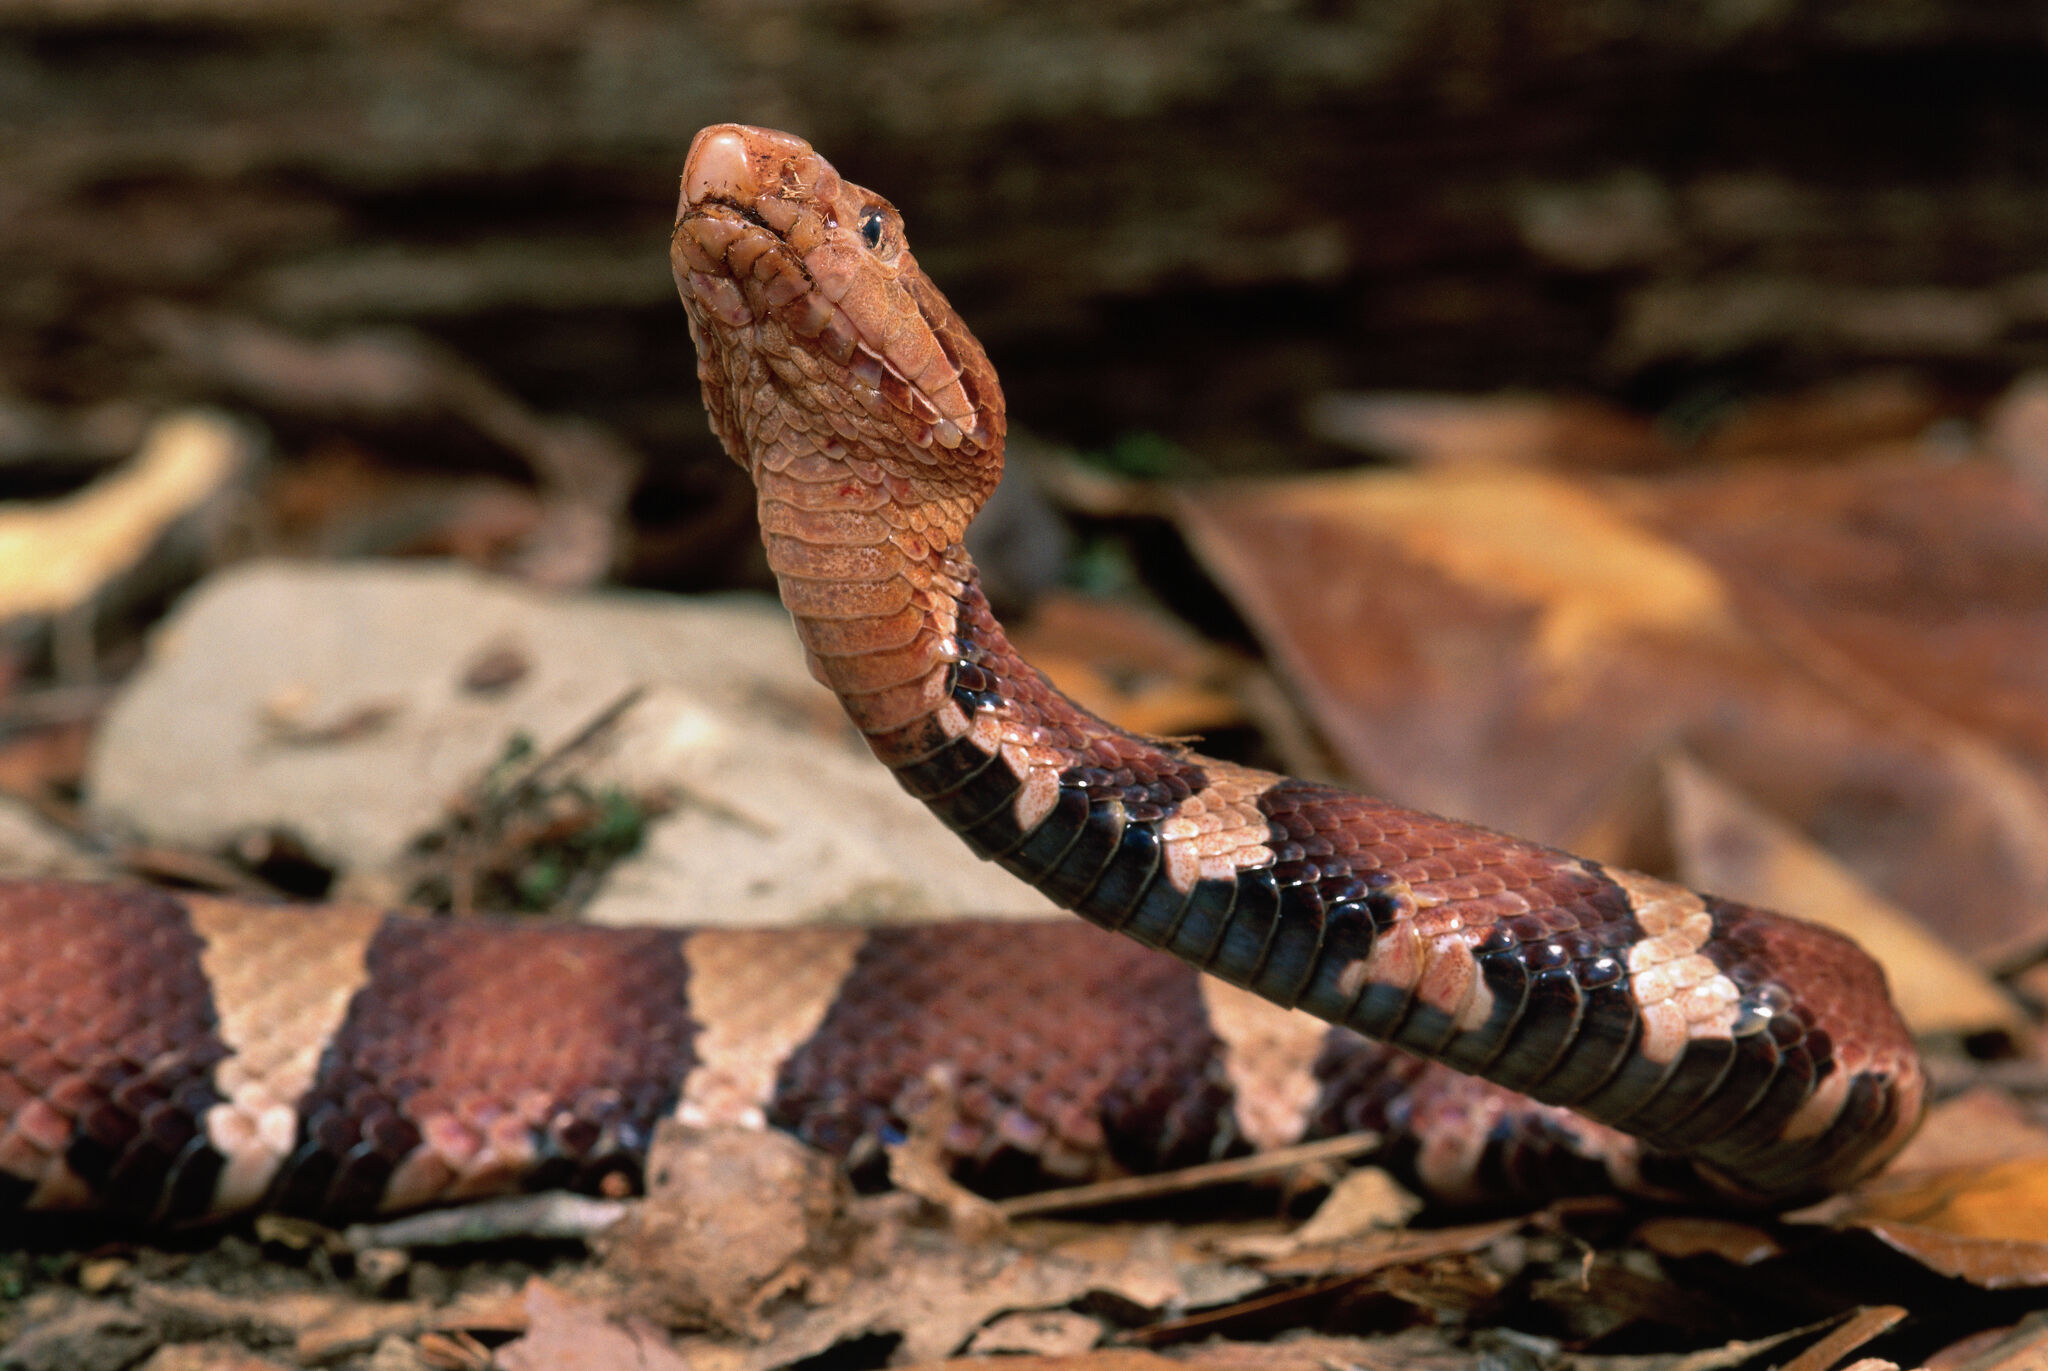 Never been so scared': Venomous copperhead snake bites 5-year-old boy at  Texas home